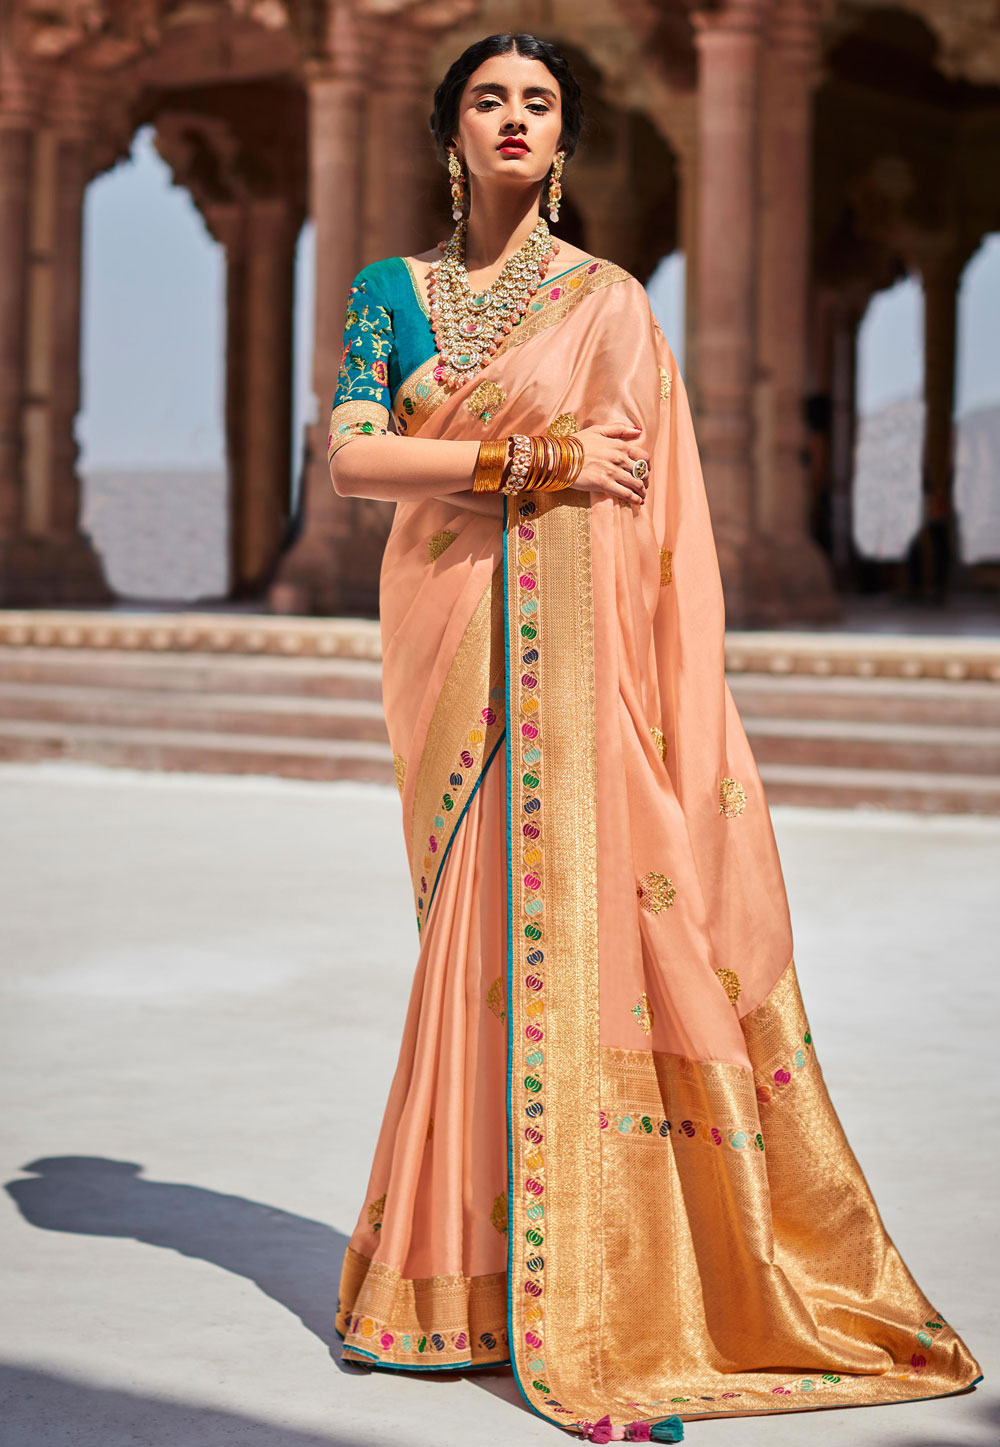 Buy Maroon & Peach Saree with Peach Blouse | Designer Wear | TheHLabel